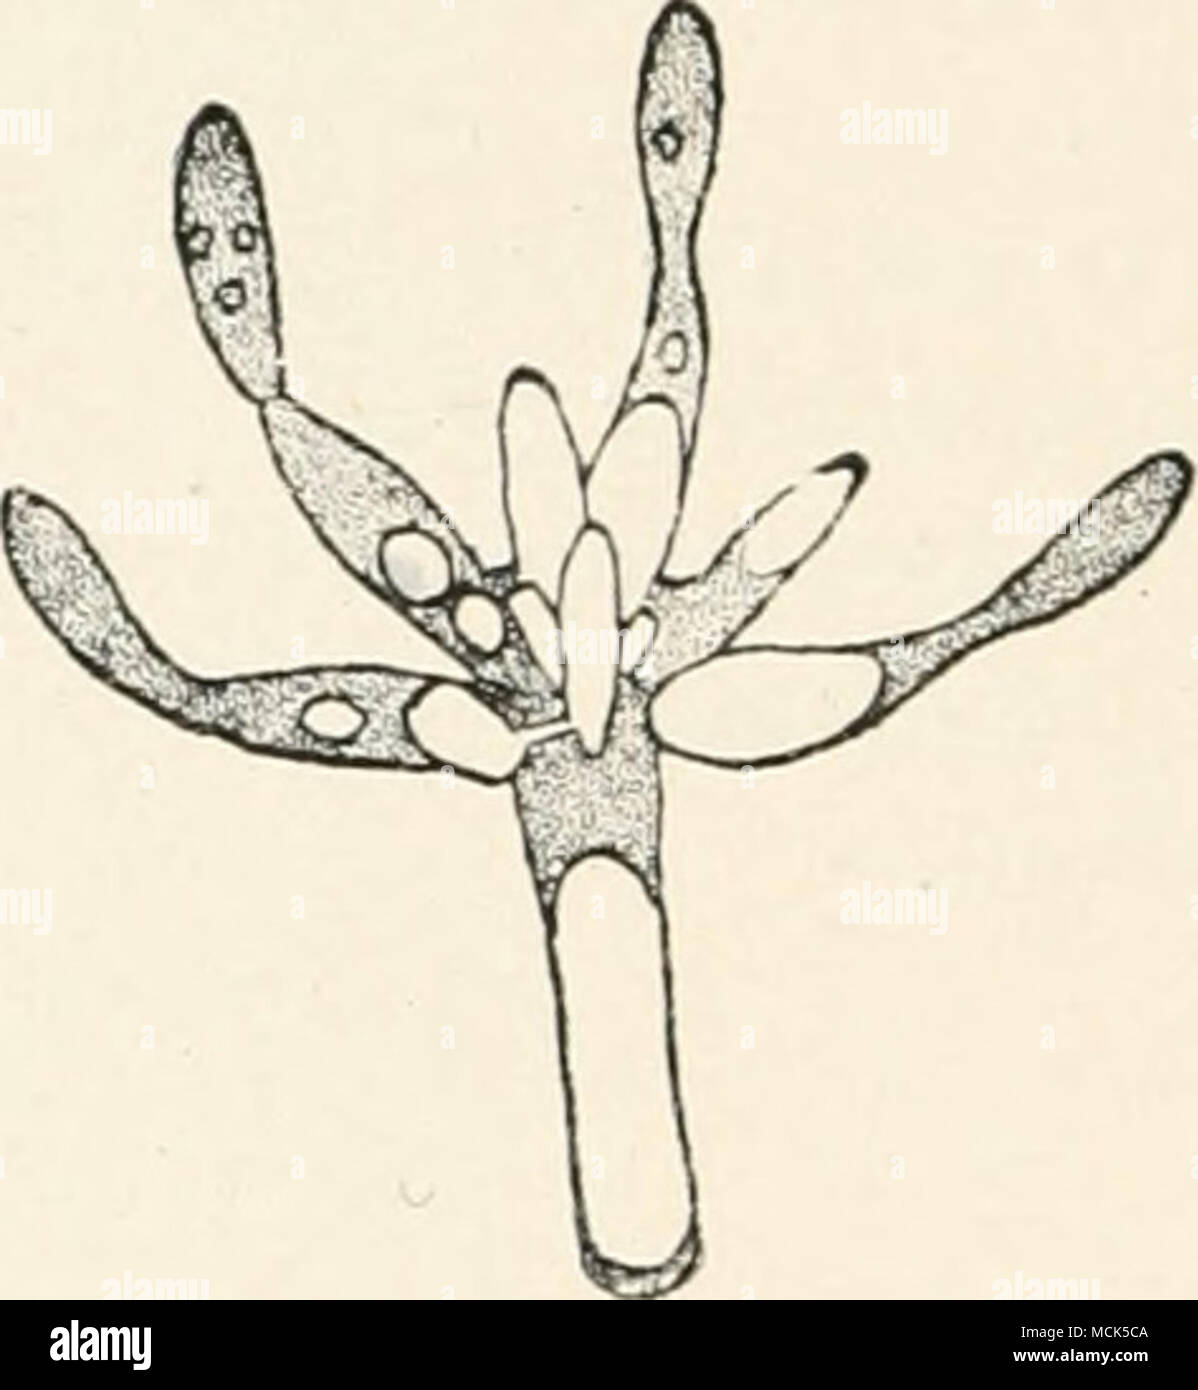 . Fig. 175.—Ttiburcinia trieatalis. Spore- Fig. 176.—Apex of an isolated promy- mass germinating; several promycelia have celium from Fig. 175 ; it carries a whorl of been produced and are proceeding to form branches, some of which have fused in pairs; whorls of branches. (After Woronin.) all are developing conidia. (After Woronin.) spaces of the pith and rind-parenchyma, also the vessels. The hyphae apply themselves closely to the cell-walls, and certain short branched hyphae actually penetrate into the cells. The spore-masses are developed from delicate branched multiseptate filaments of the Stock Photo